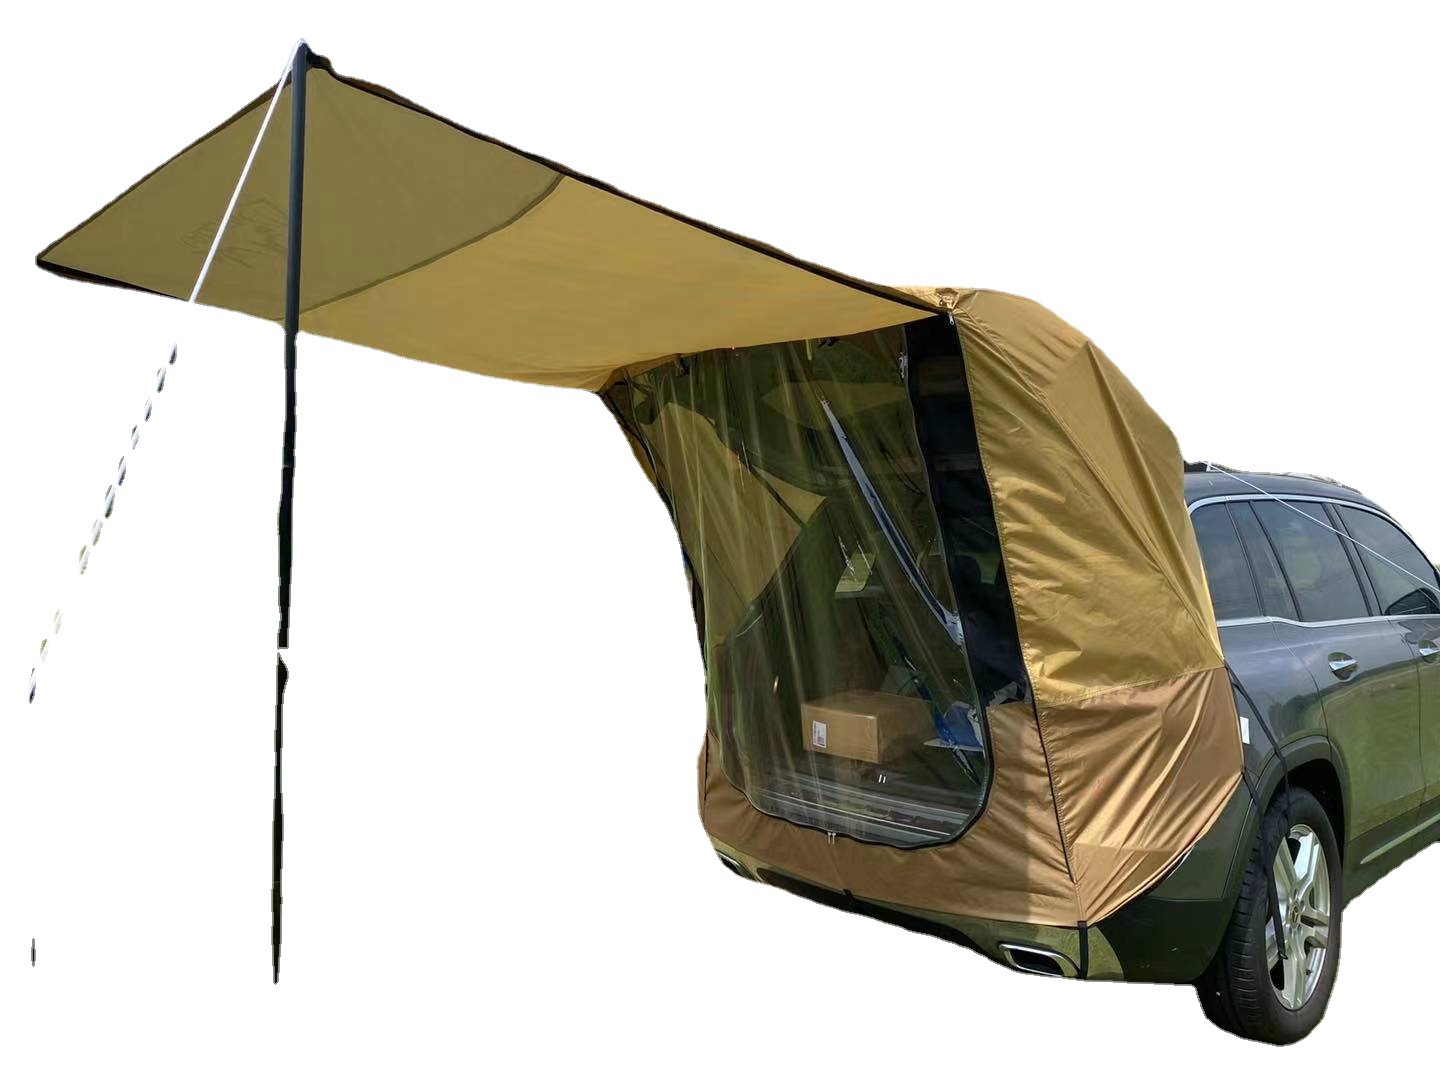 Outdoor Self-driving Tour Barbecue Camping Car Tail Extension Tent Sunshade Rainproof Car Travel Tent Trunk Tent